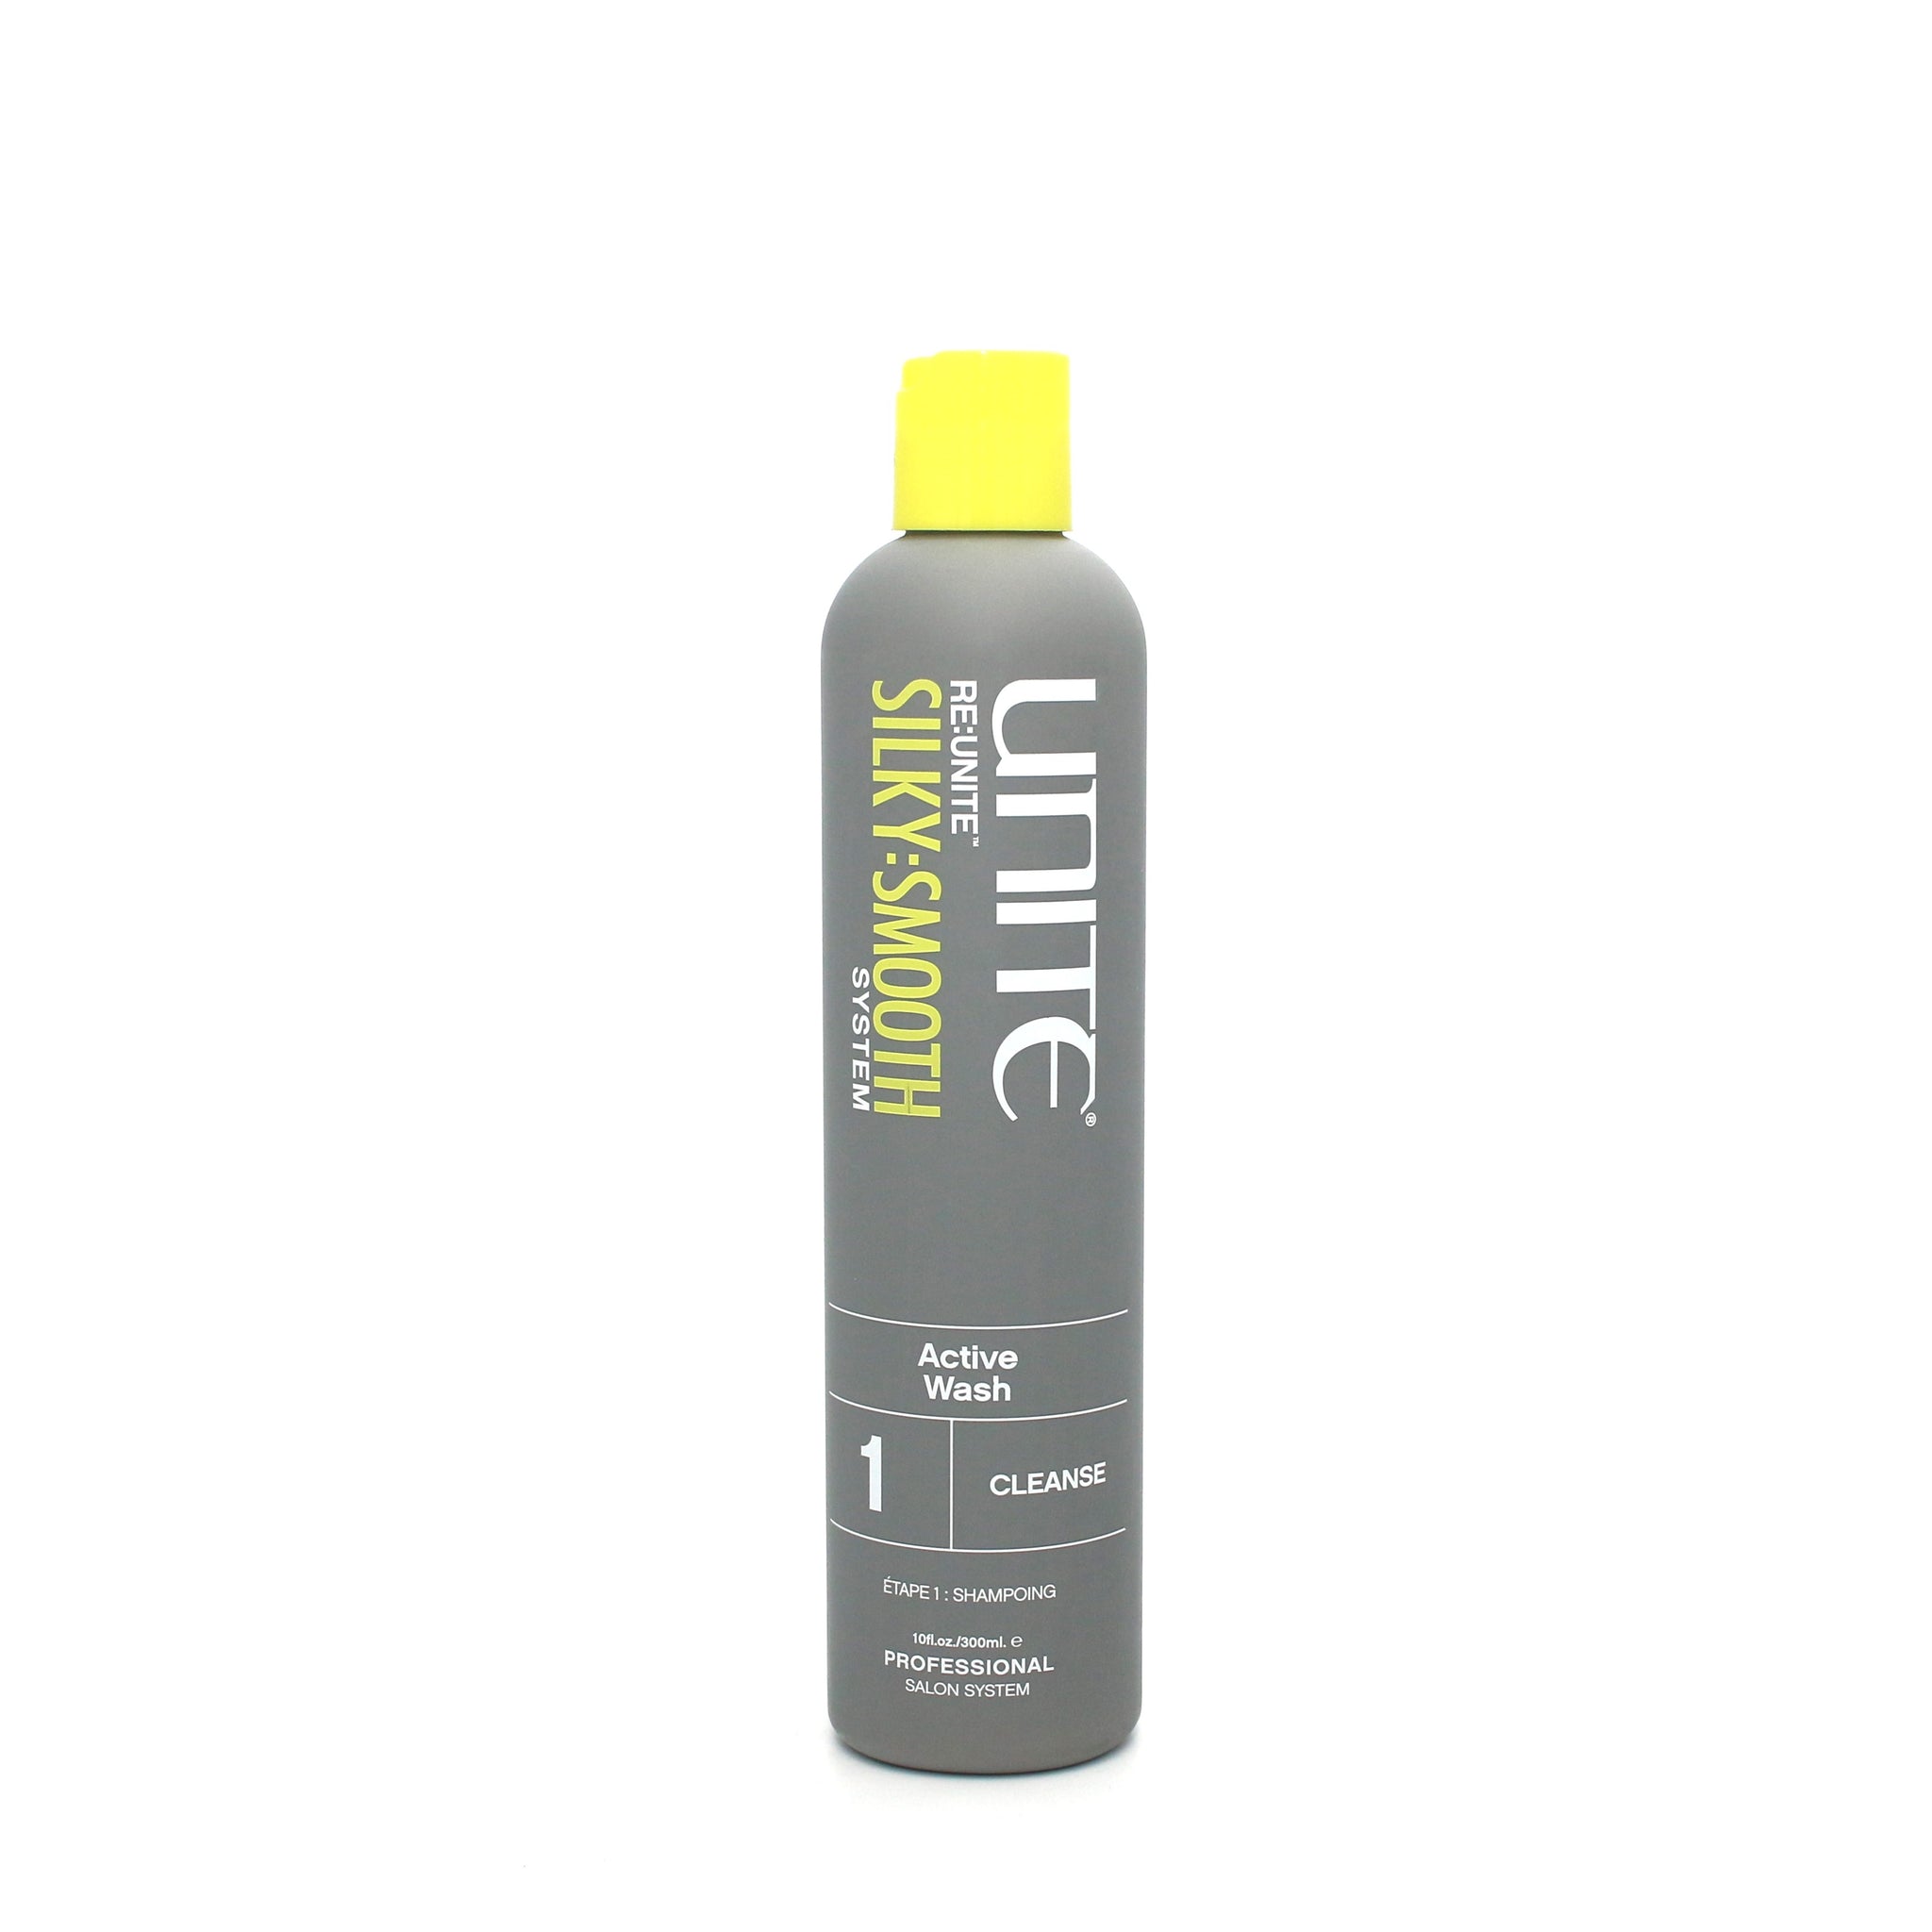 UNITE Re: Unite Silky Smooth System Active Wash 1 Cleanse 10 oz